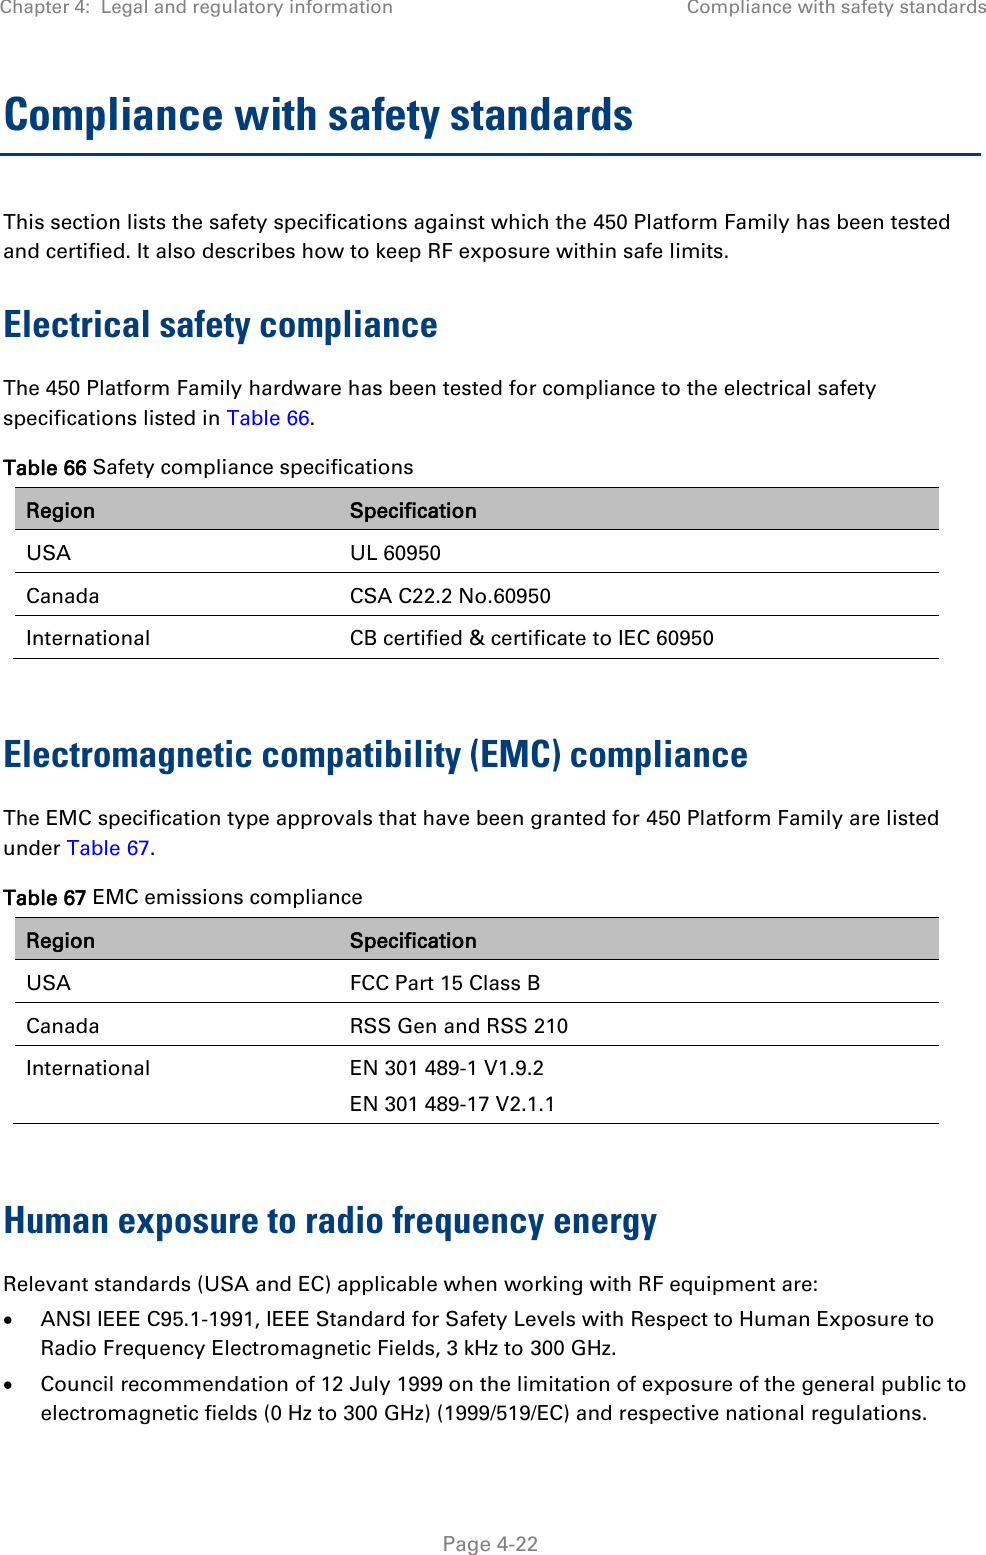 Chapter 4:  Legal and regulatory information Compliance with safety standards   Page 4-22 Compliance with safety standards This section lists the safety specifications against which the 450 Platform Family has been tested and certified. It also describes how to keep RF exposure within safe limits. Electrical safety compliance  The 450 Platform Family hardware has been tested for compliance to the electrical safety specifications listed in Table 66. Table 66 Safety compliance specifications Region Specification USA UL 60950 Canada CSA C22.2 No.60950 International CB certified &amp; certificate to IEC 60950  Electromagnetic compatibility (EMC) compliance The EMC specification type approvals that have been granted for 450 Platform Family are listed under Table 67. Table 67 EMC emissions compliance Region Specification USA FCC Part 15 Class B Canada RSS Gen and RSS 210 International EN 301 489-1 V1.9.2 EN 301 489-17 V2.1.1  Human exposure to radio frequency energy Relevant standards (USA and EC) applicable when working with RF equipment are:  ANSI IEEE C95.1-1991, IEEE Standard for Safety Levels with Respect to Human Exposure to Radio Frequency Electromagnetic Fields, 3 kHz to 300 GHz.  Council recommendation of 12 July 1999 on the limitation of exposure of the general public to electromagnetic fields (0 Hz to 300 GHz) (1999/519/EC) and respective national regulations. 